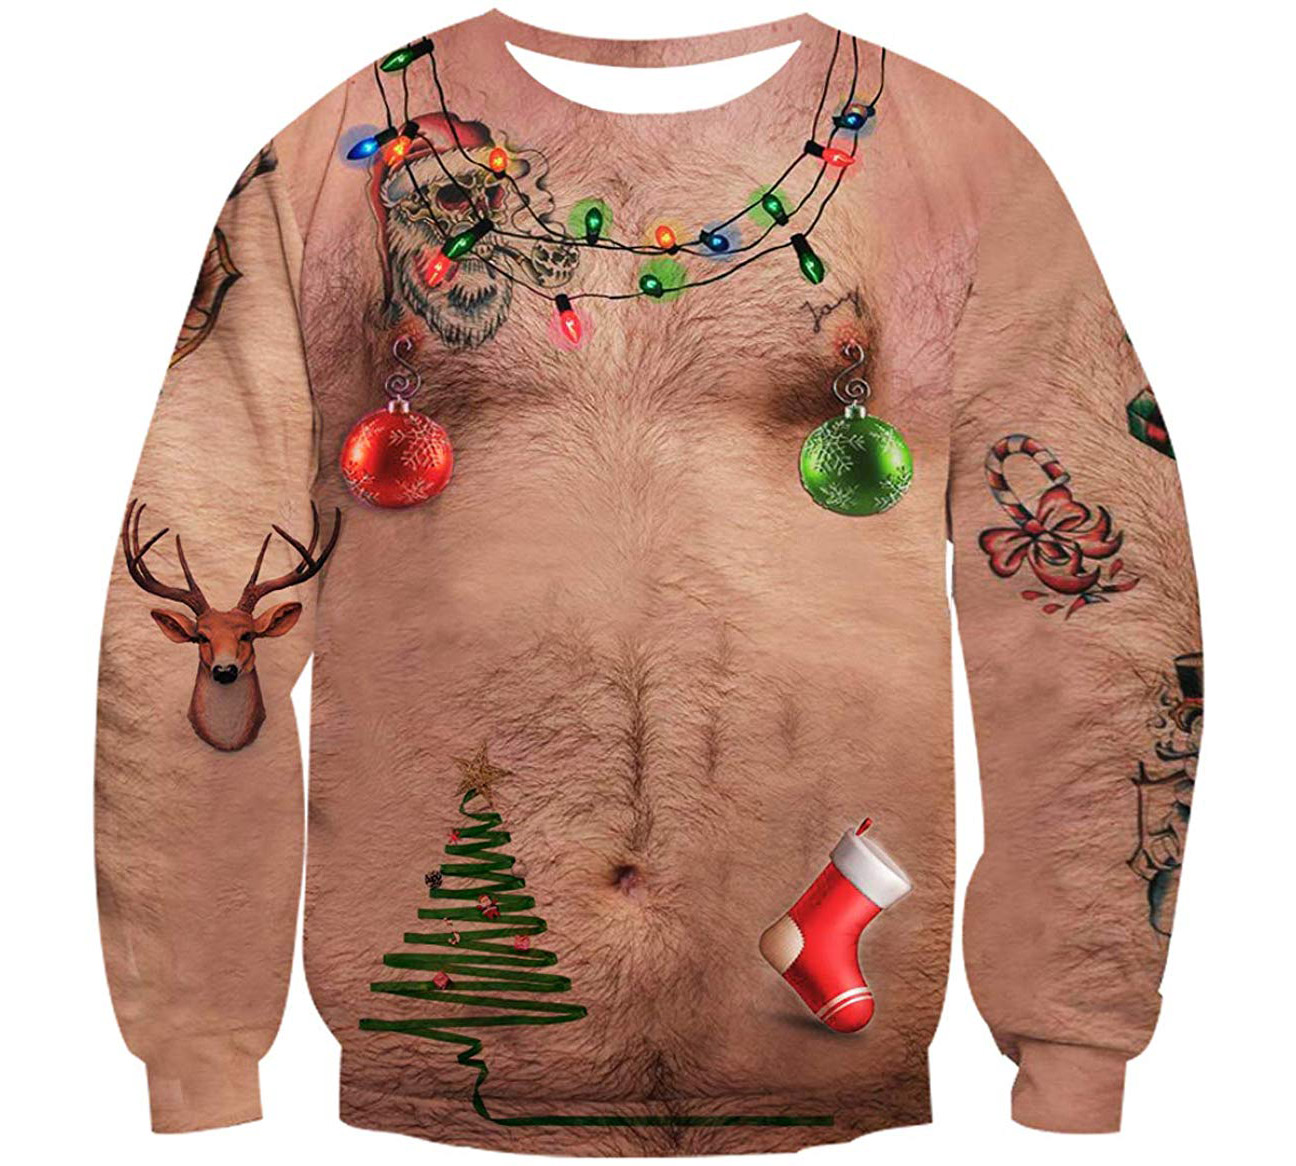 The 19 Best Ugly Christmas Sweaters For 2019 Deez Nuts Human 4966